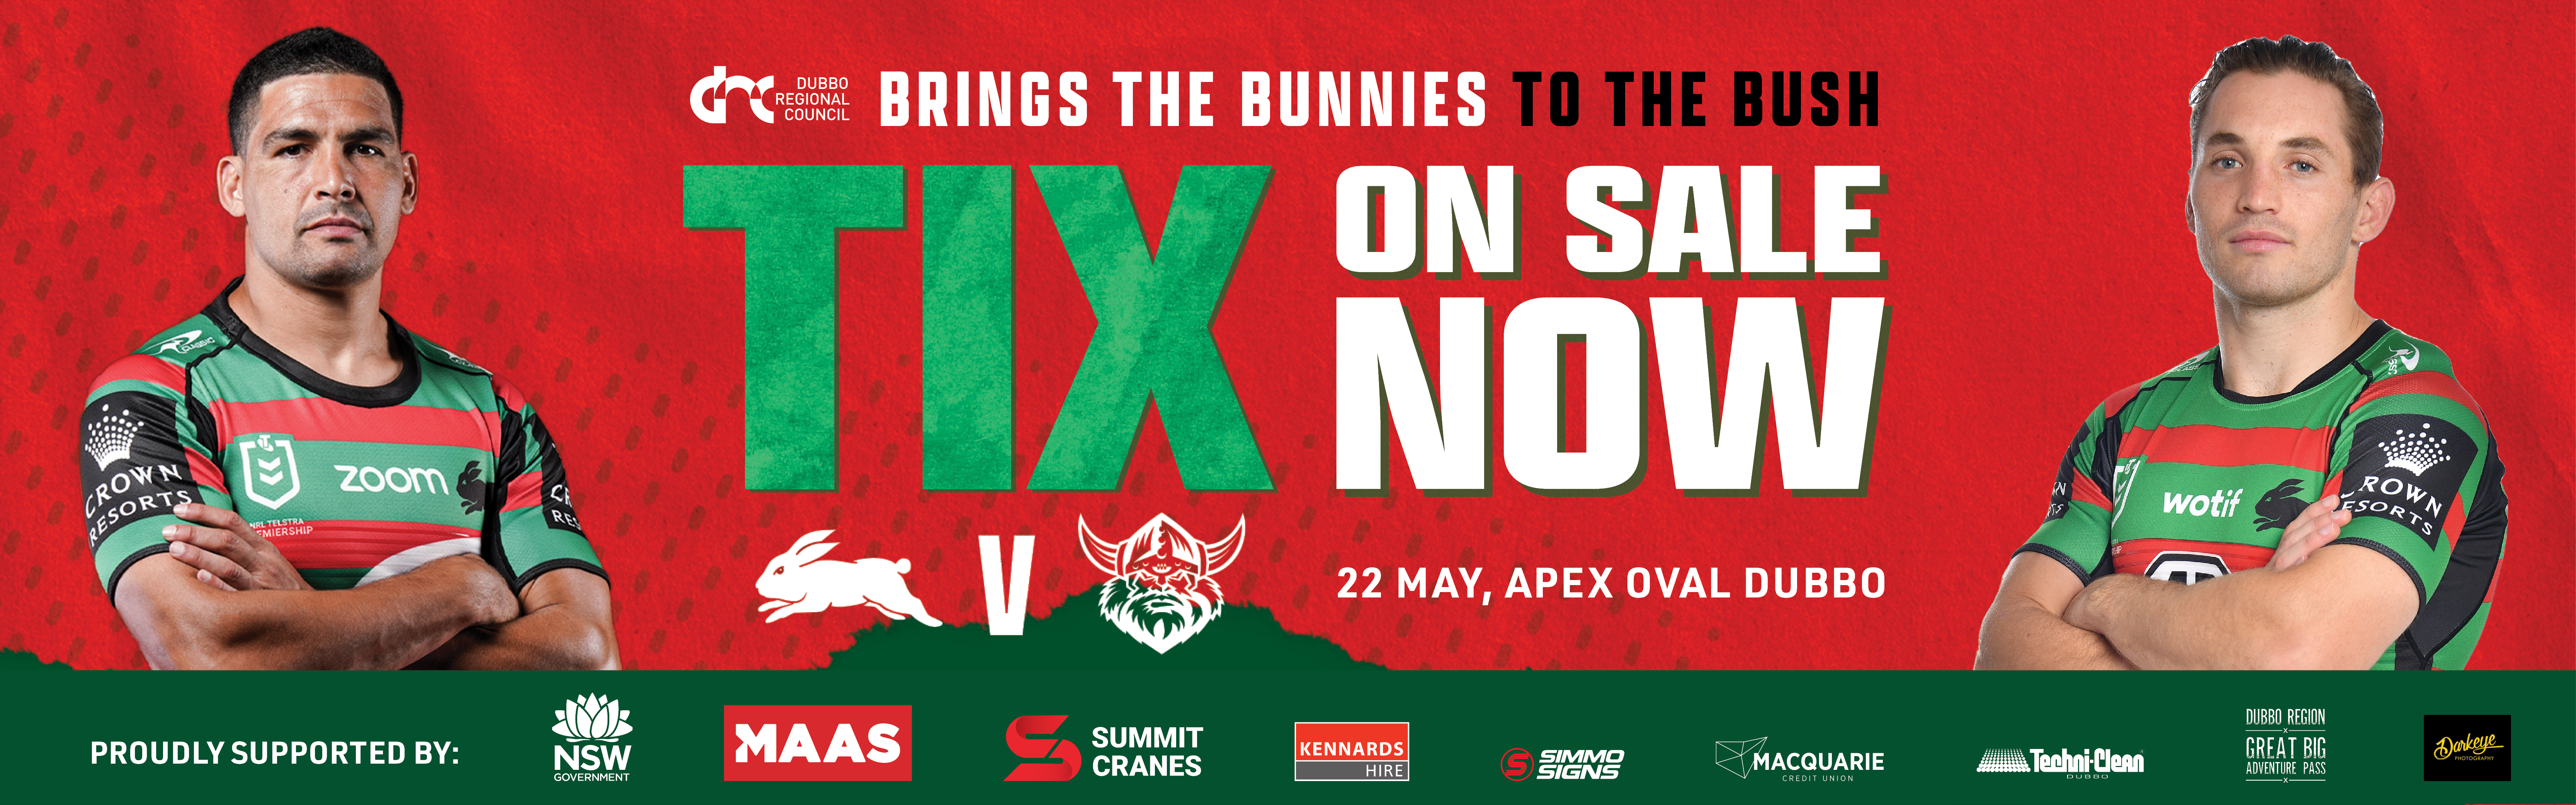 Tickets are on sale now for the South Sydney Rabbitohs V Canberra Raiders match! Secure your seat, view valued sponsors, and read frequently asked questions via our dedicated webpage.